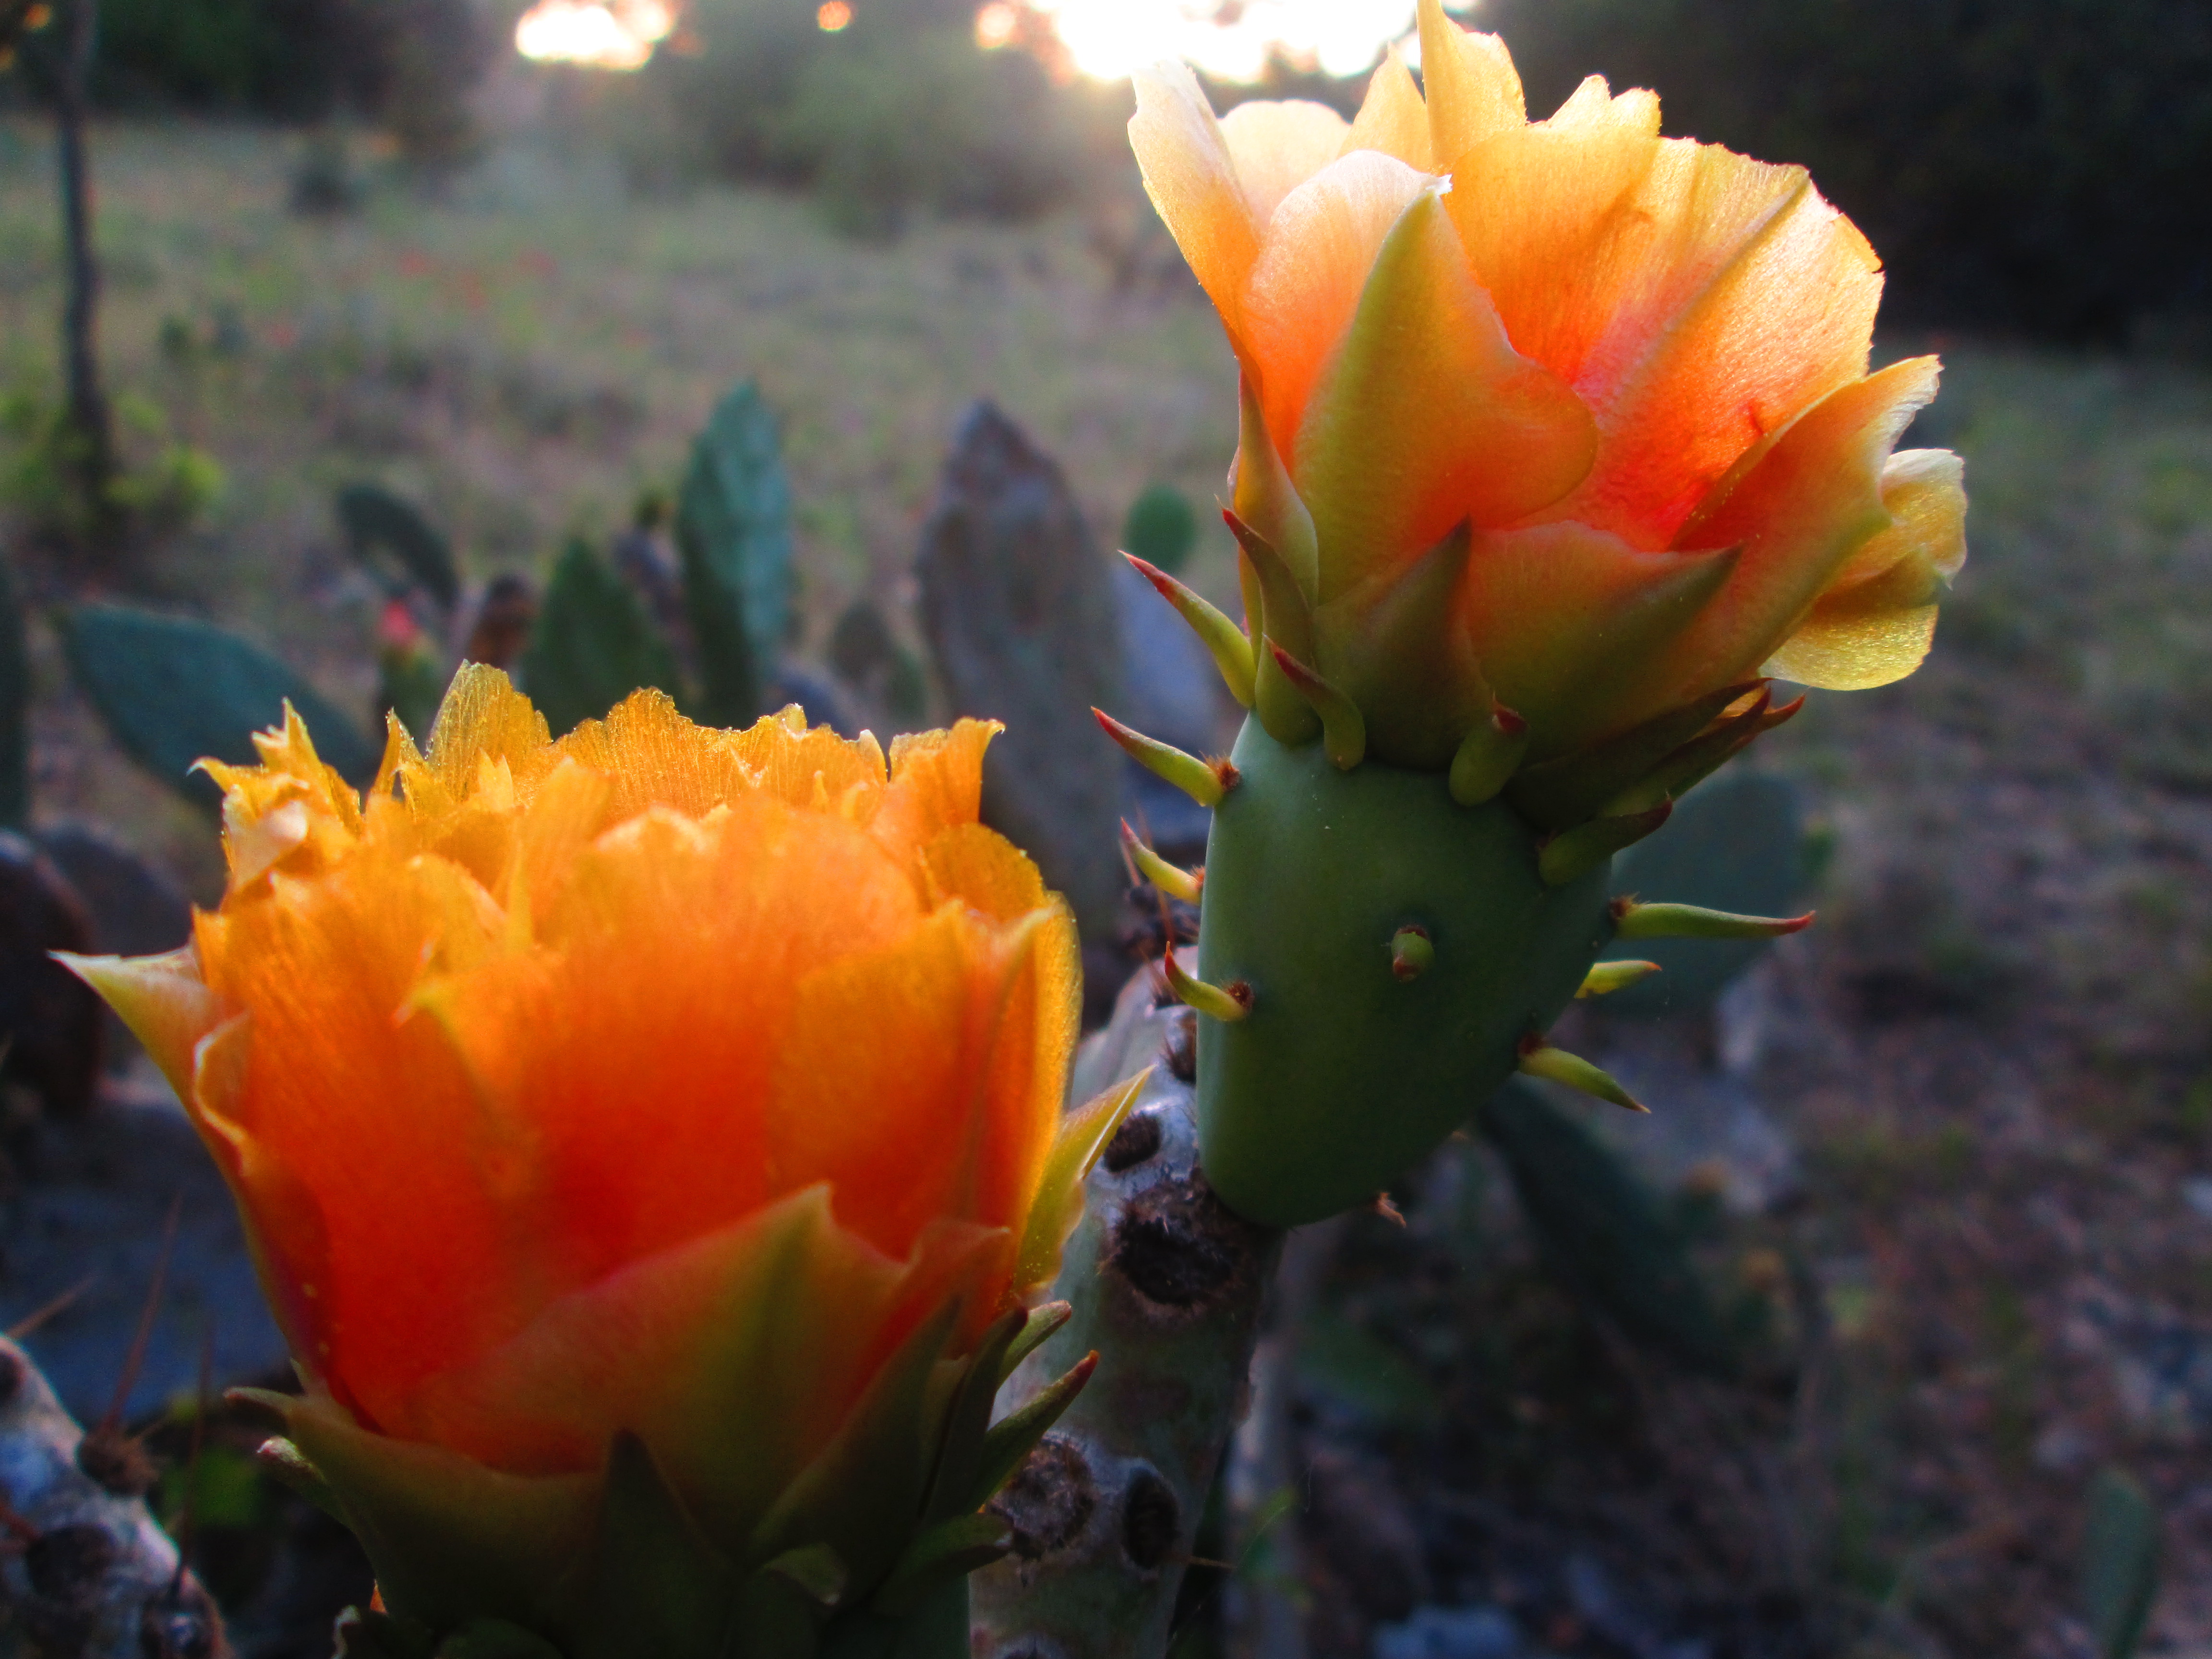 cactus flowers by Zachary